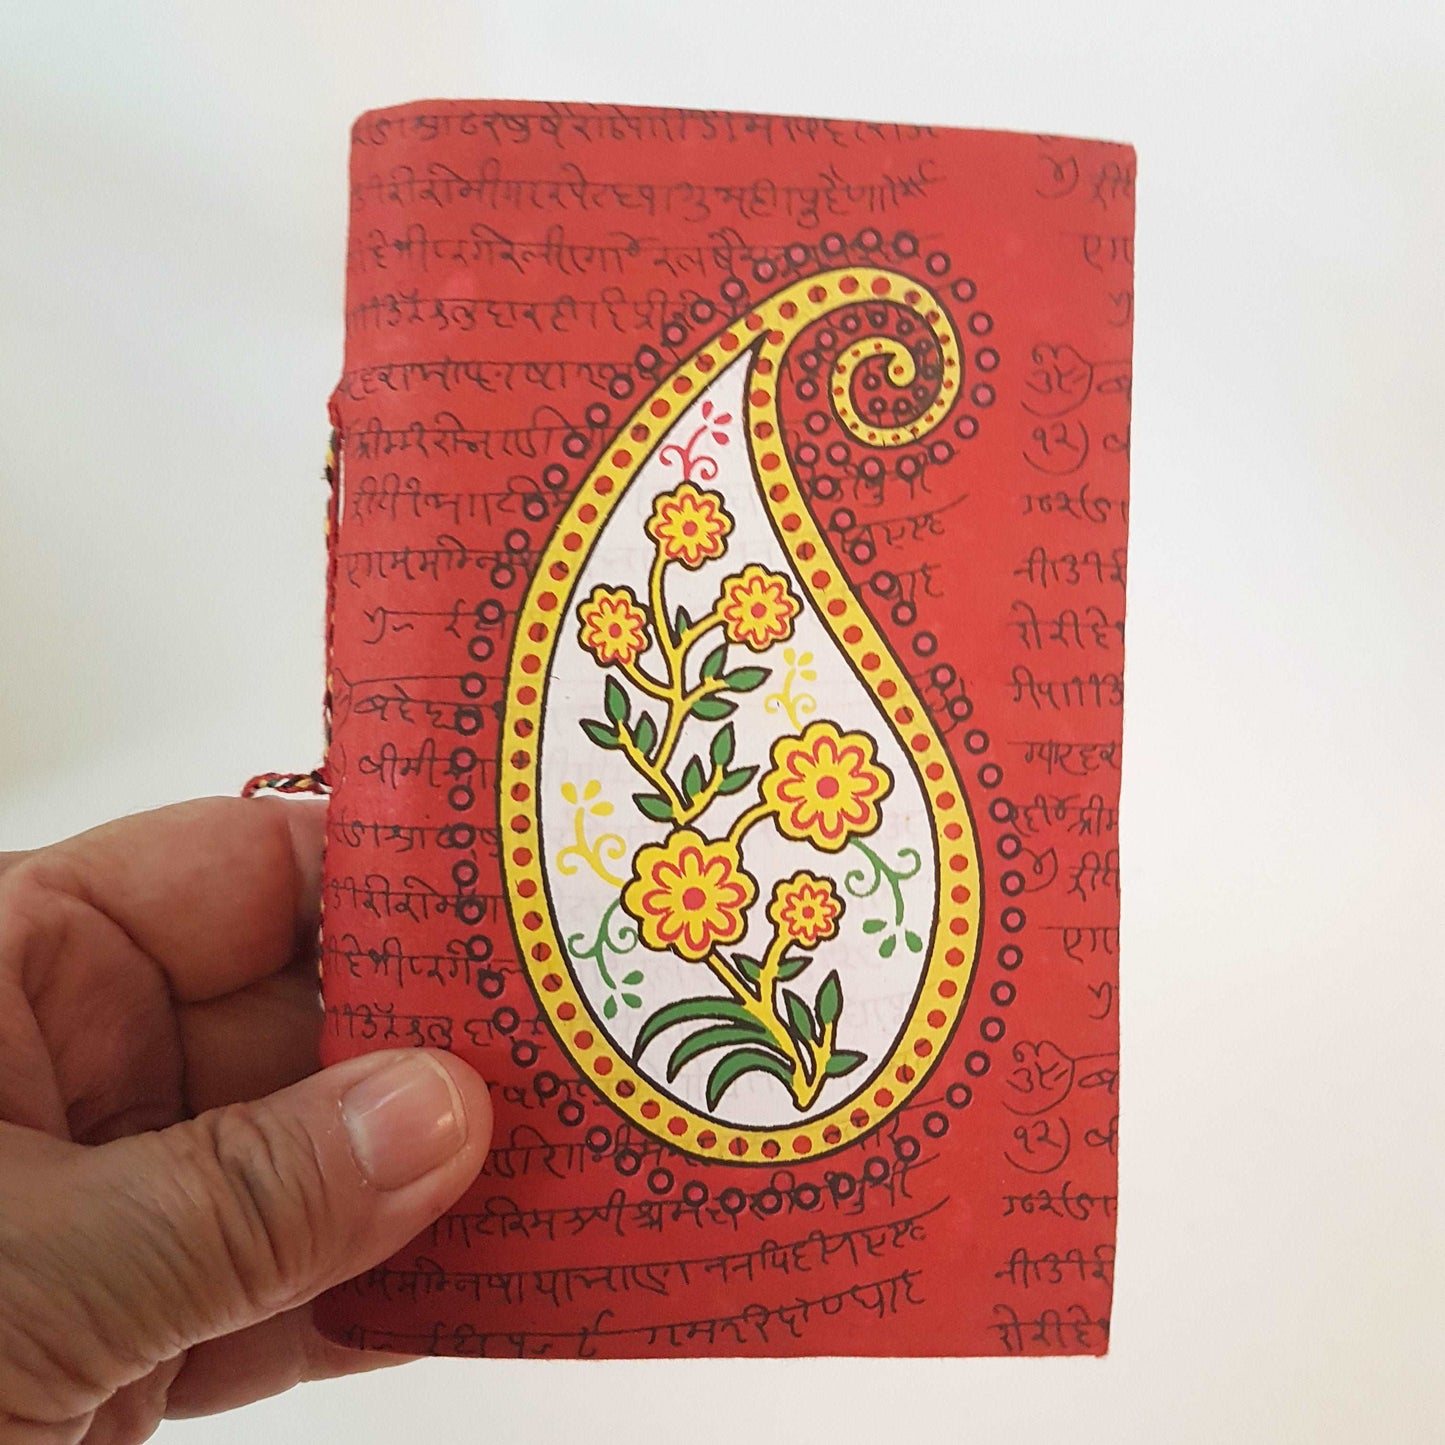 Blank notebook with red & white floral paisley design cover 4x6 inch. Use as sketchbook,  journal, diary. Premium blank paper.